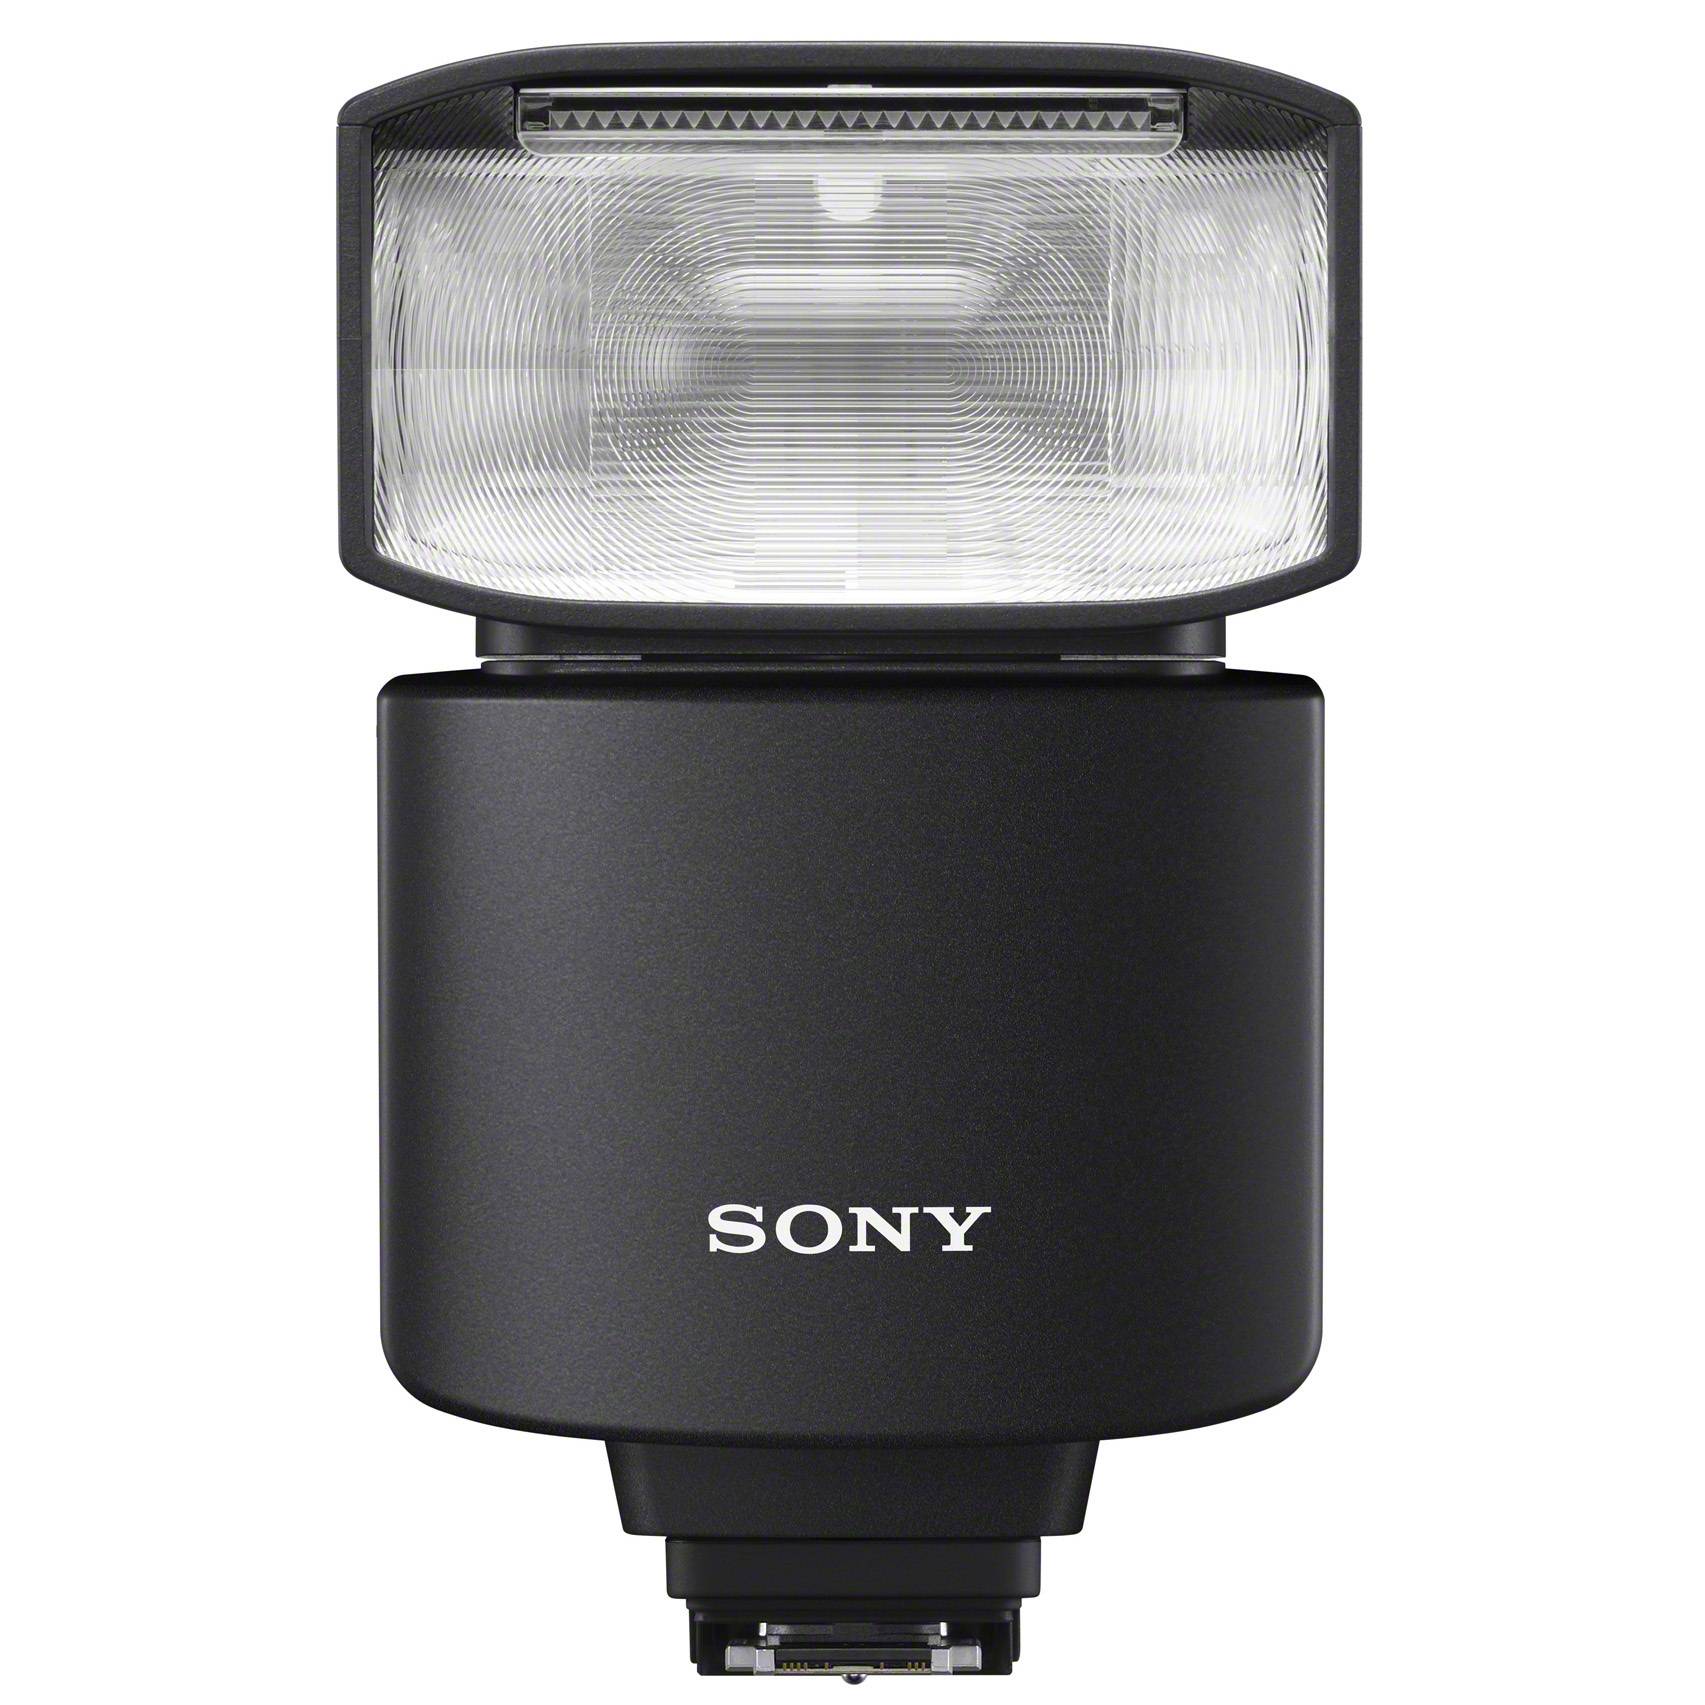 Sony Alpha External Flash with wireless remote control and GN46 power - HVL-F46RM